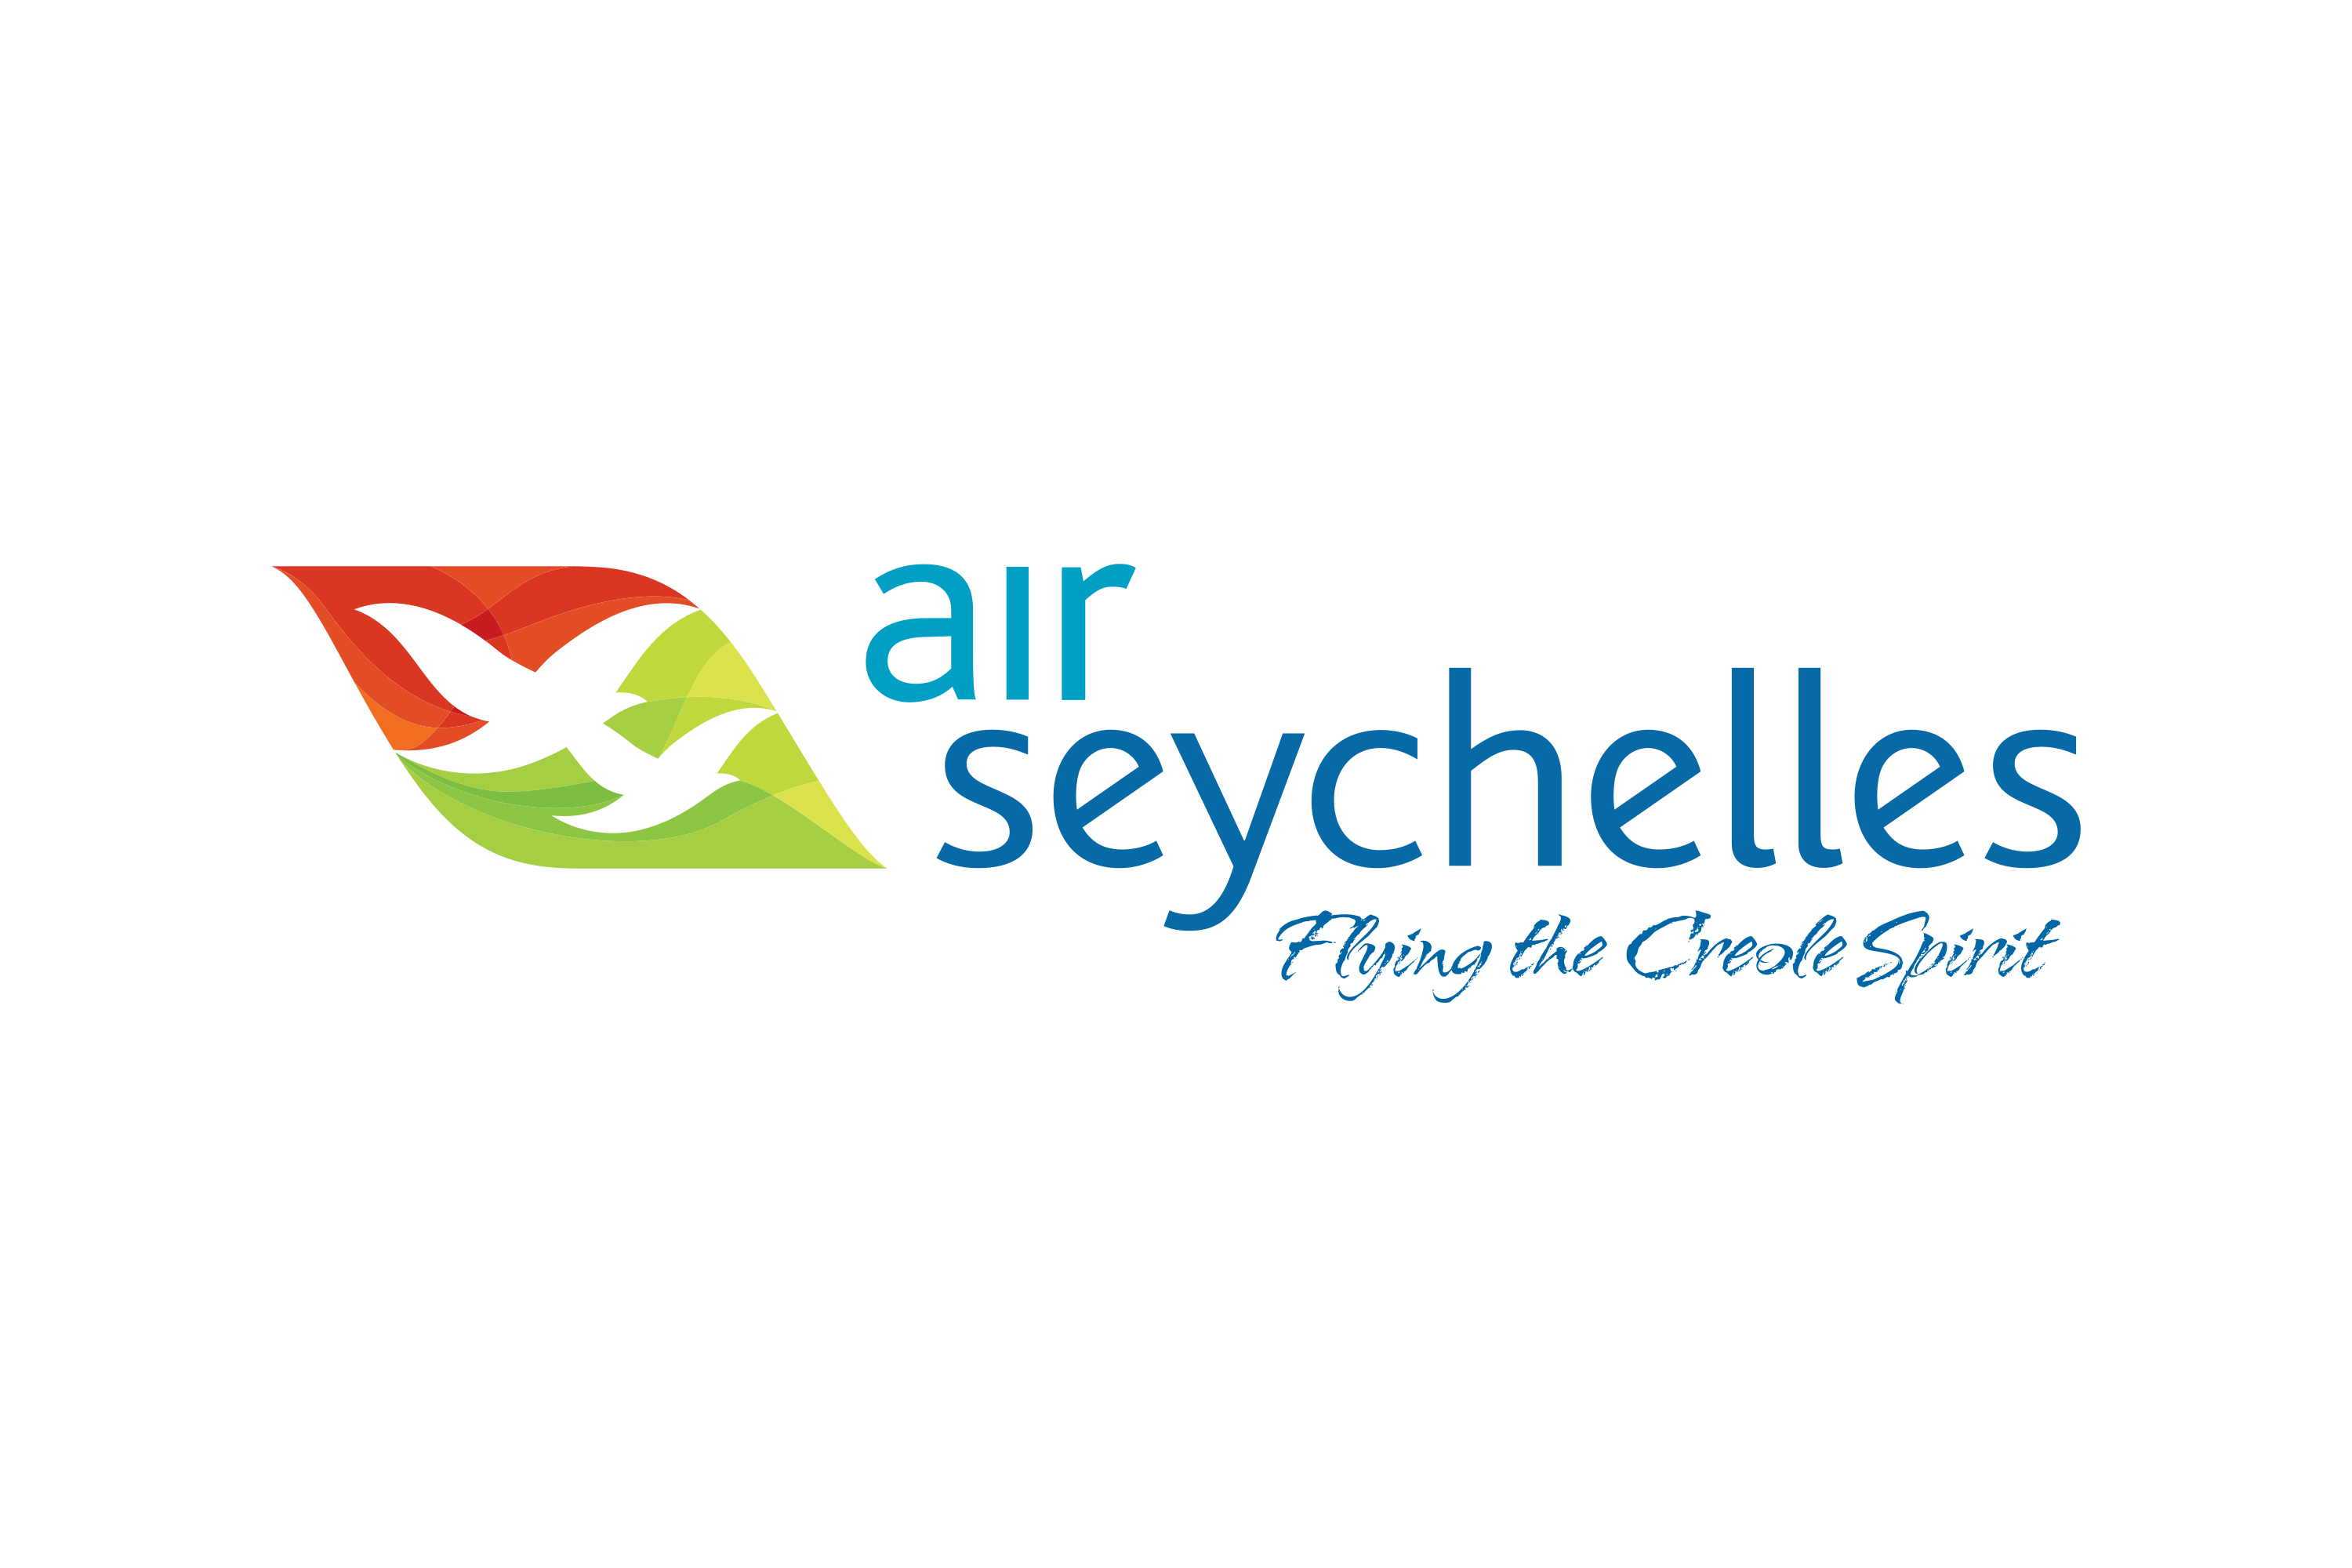 Download Air Seychelles Logo in SVG Vector or PNG File Format - Logo.wine